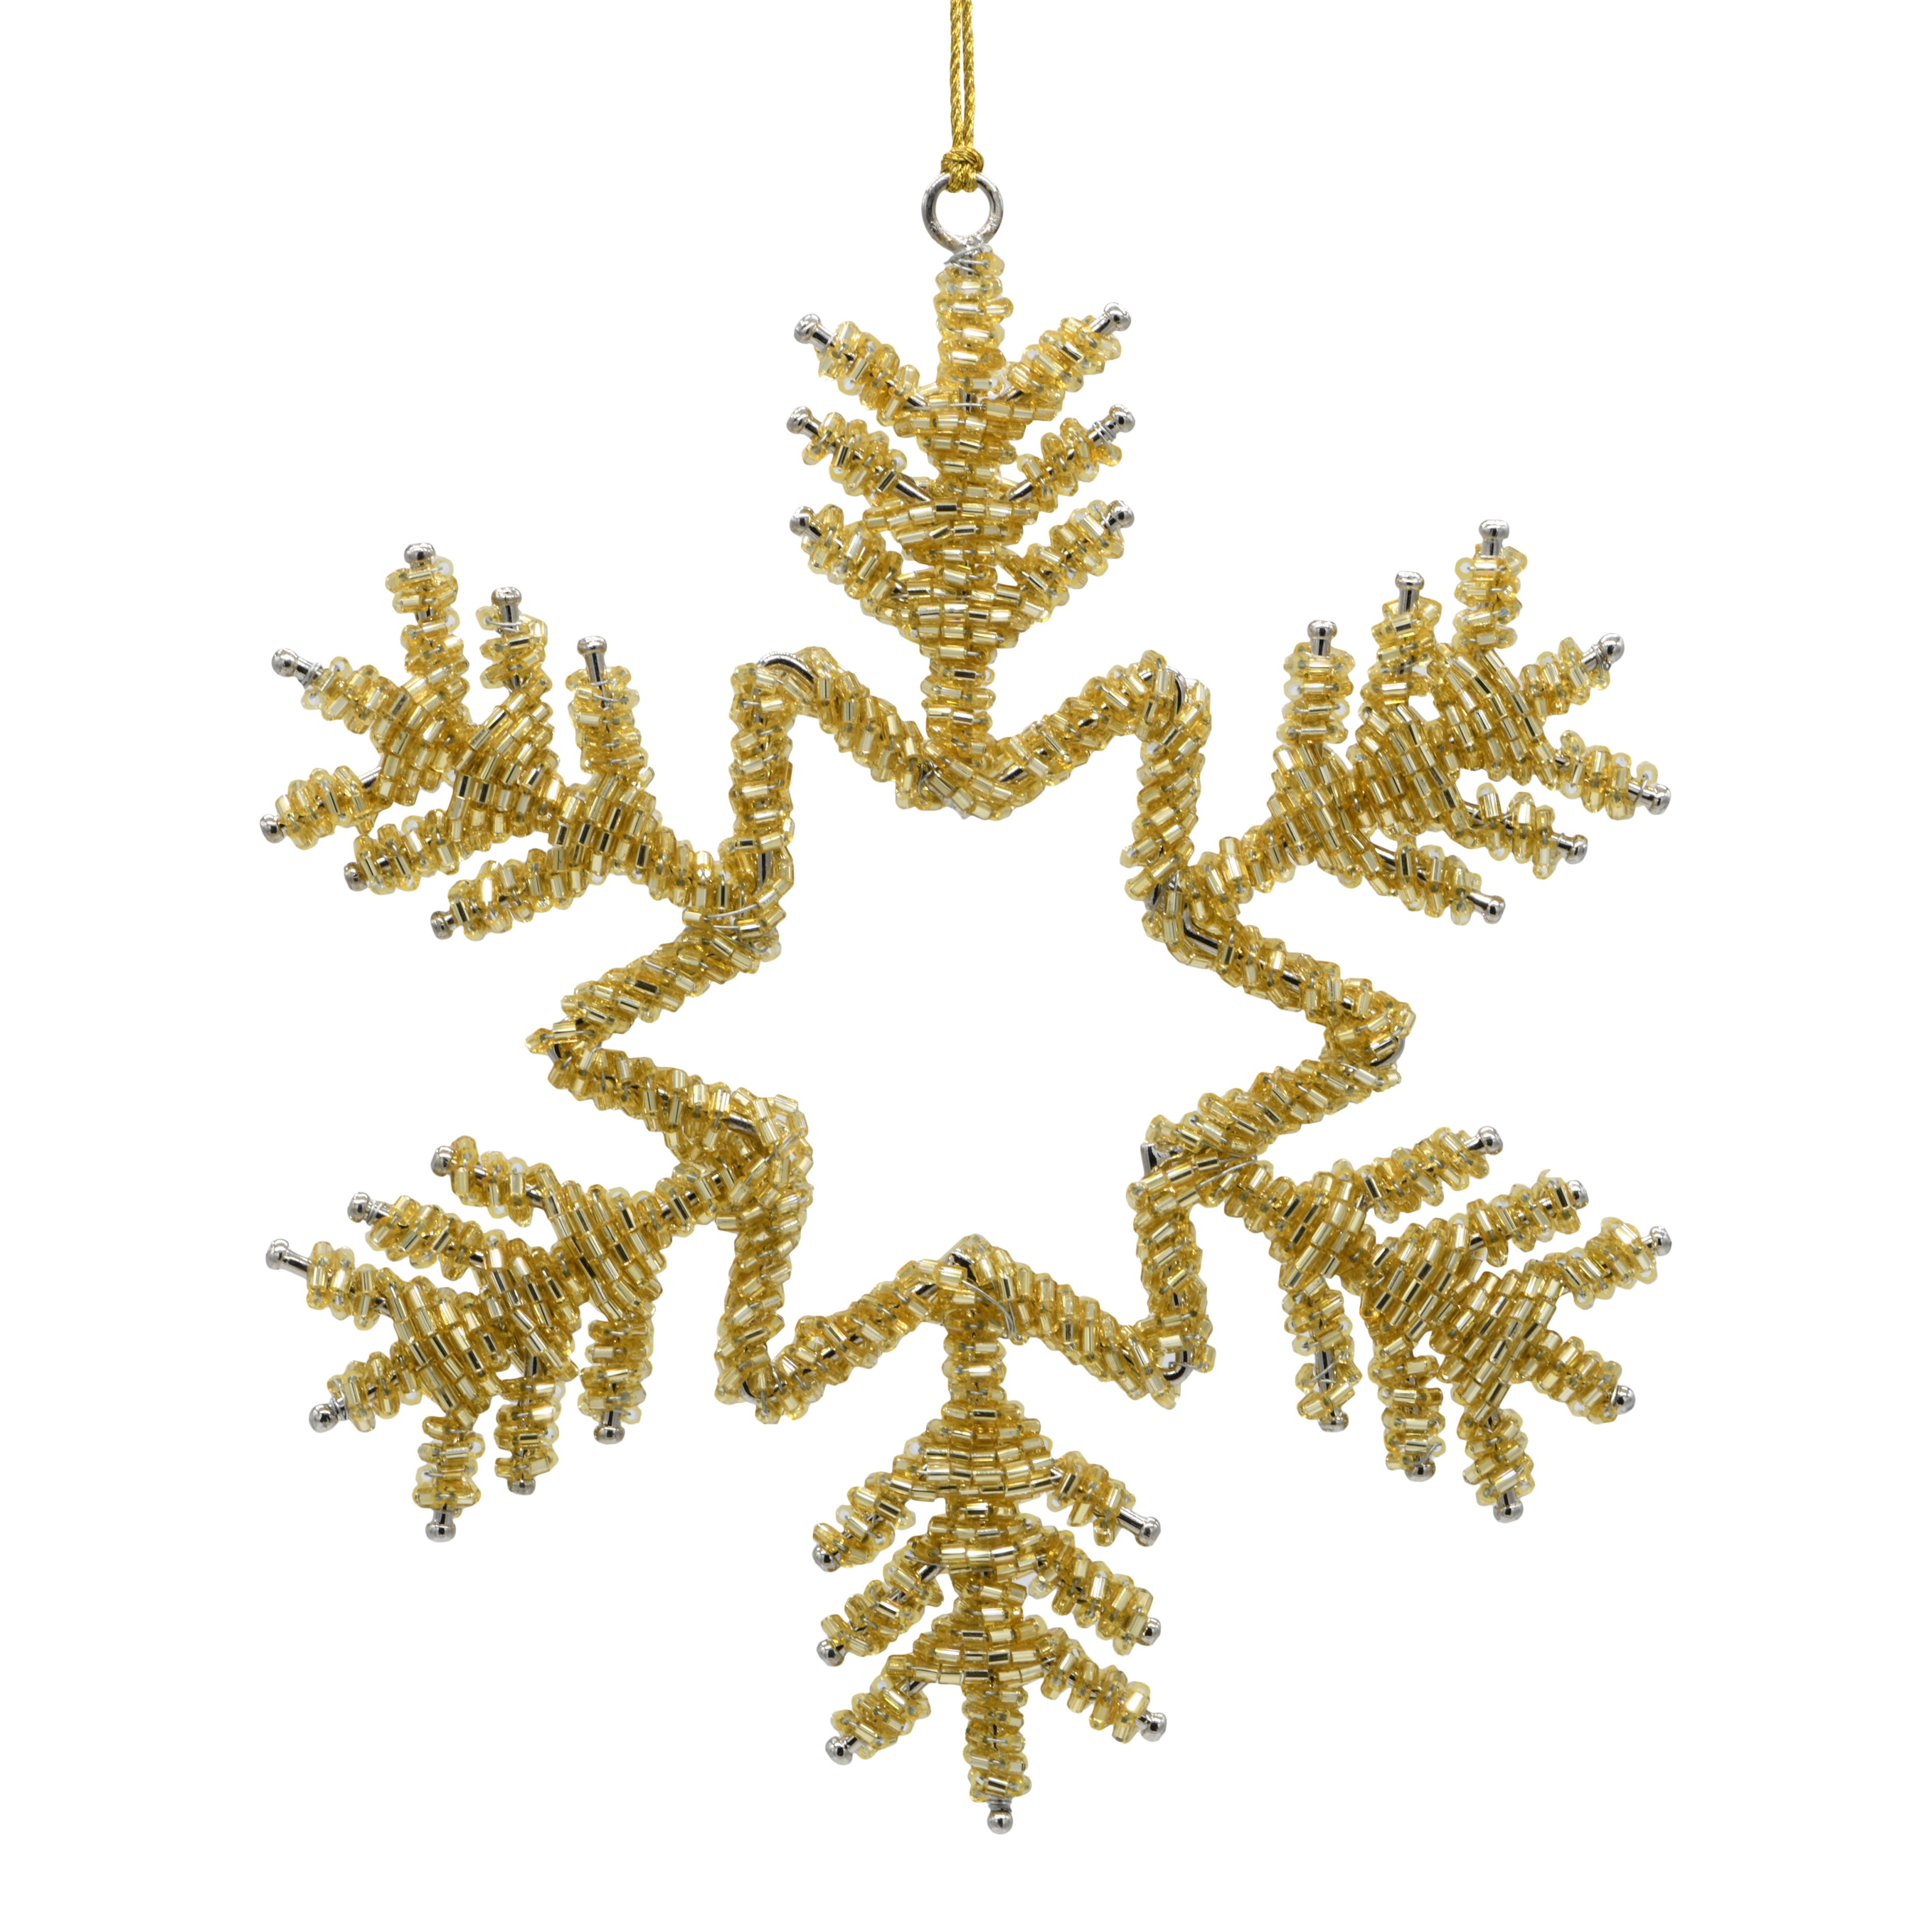 Gold Christmas Snowflake Ornament on white background